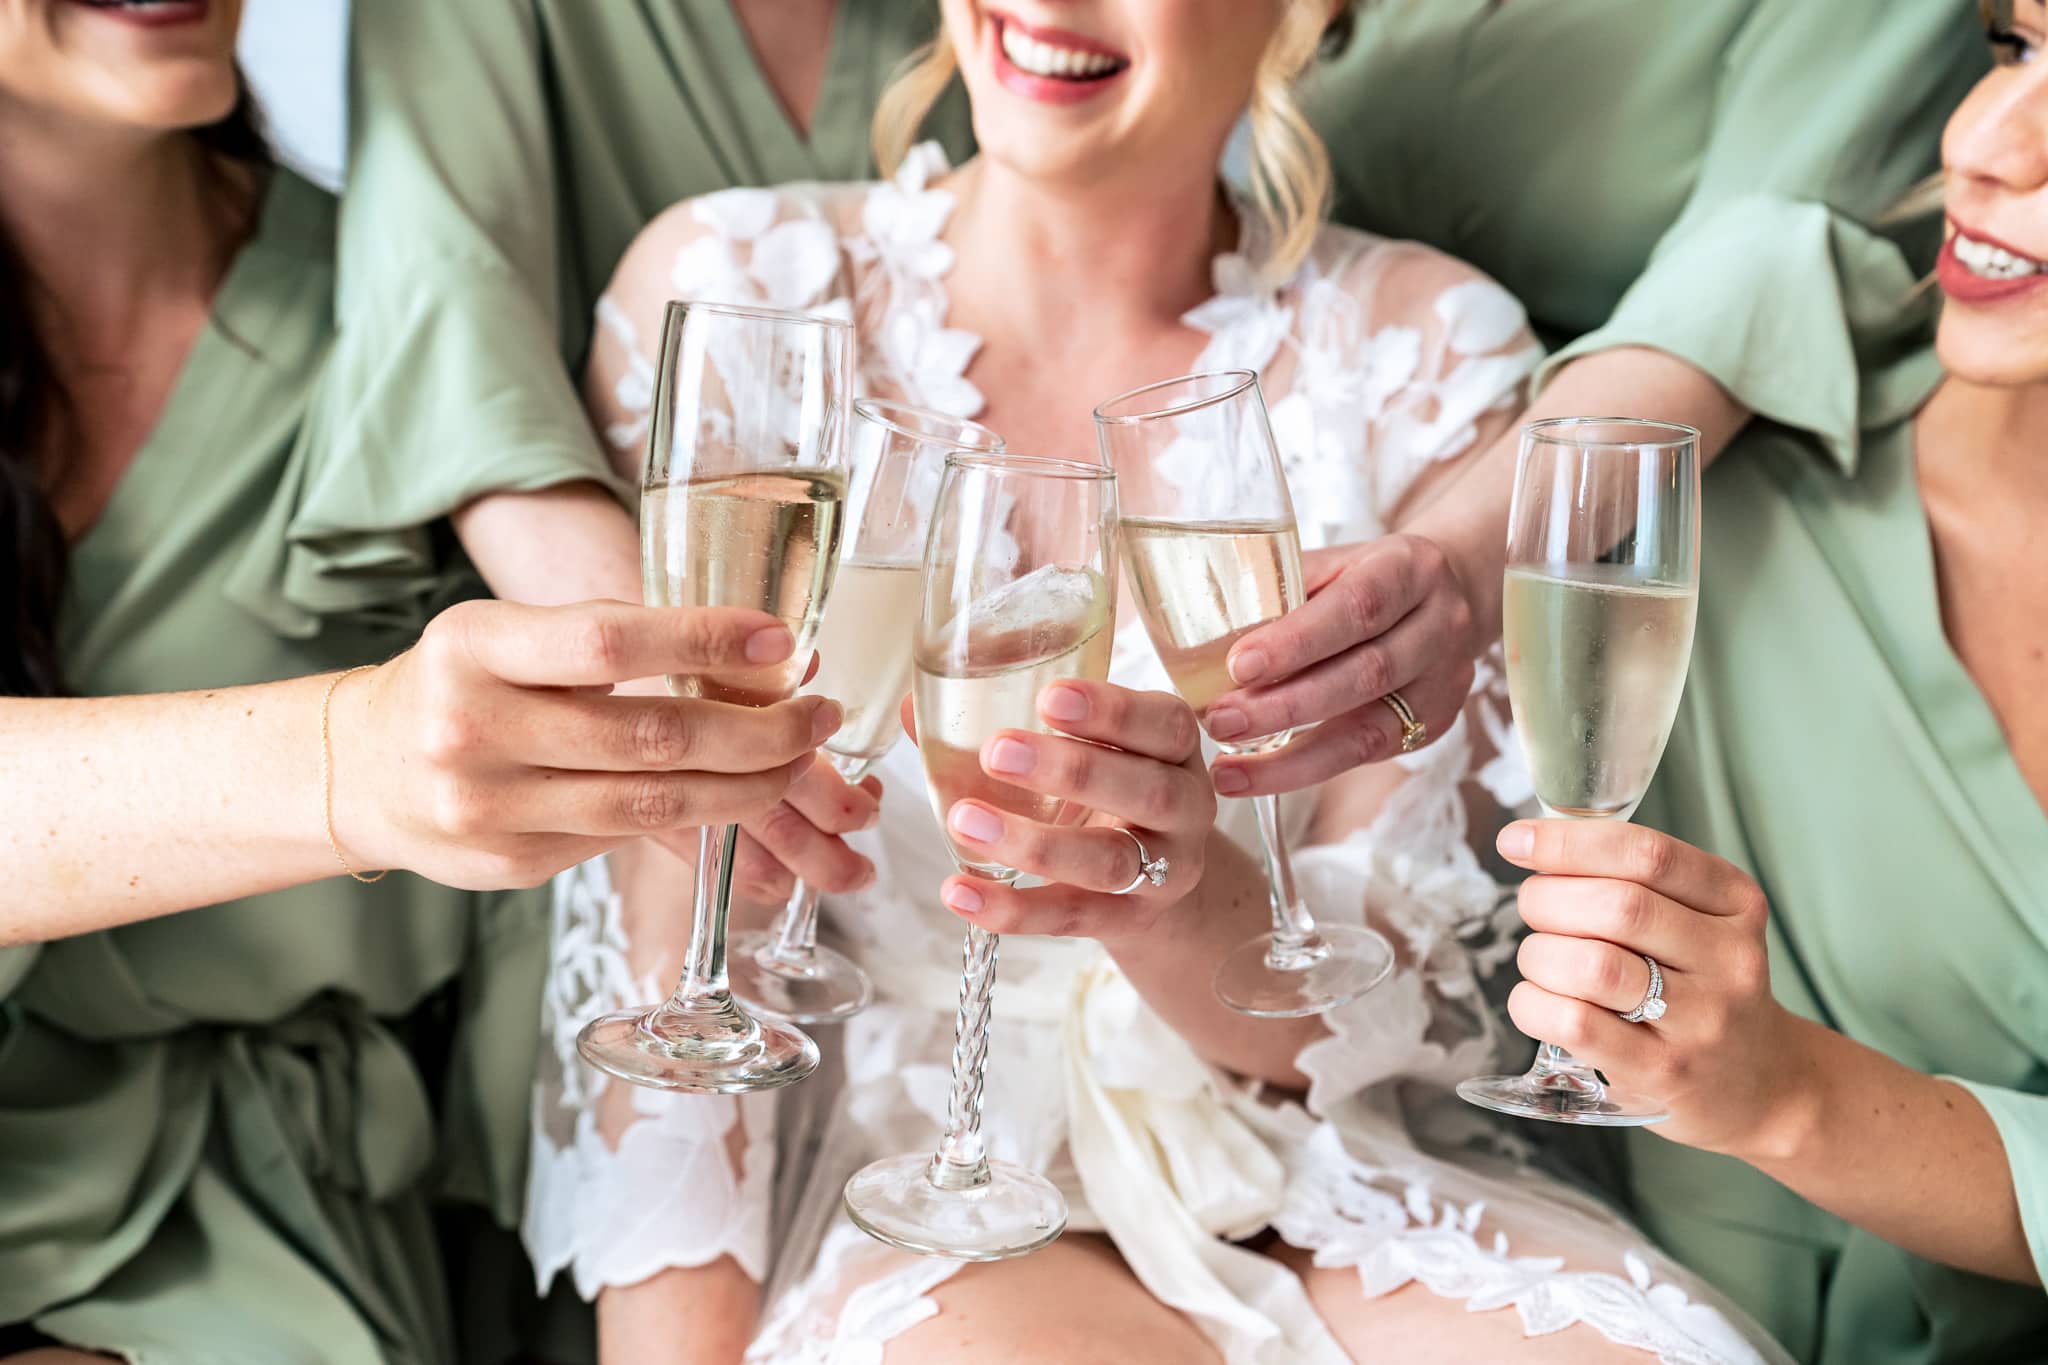 closeup of champagne glasses toasting, glasses are held by a bride in a white lace robe and bridesmaids in sage green silk robes | photo by Kivus & Camera